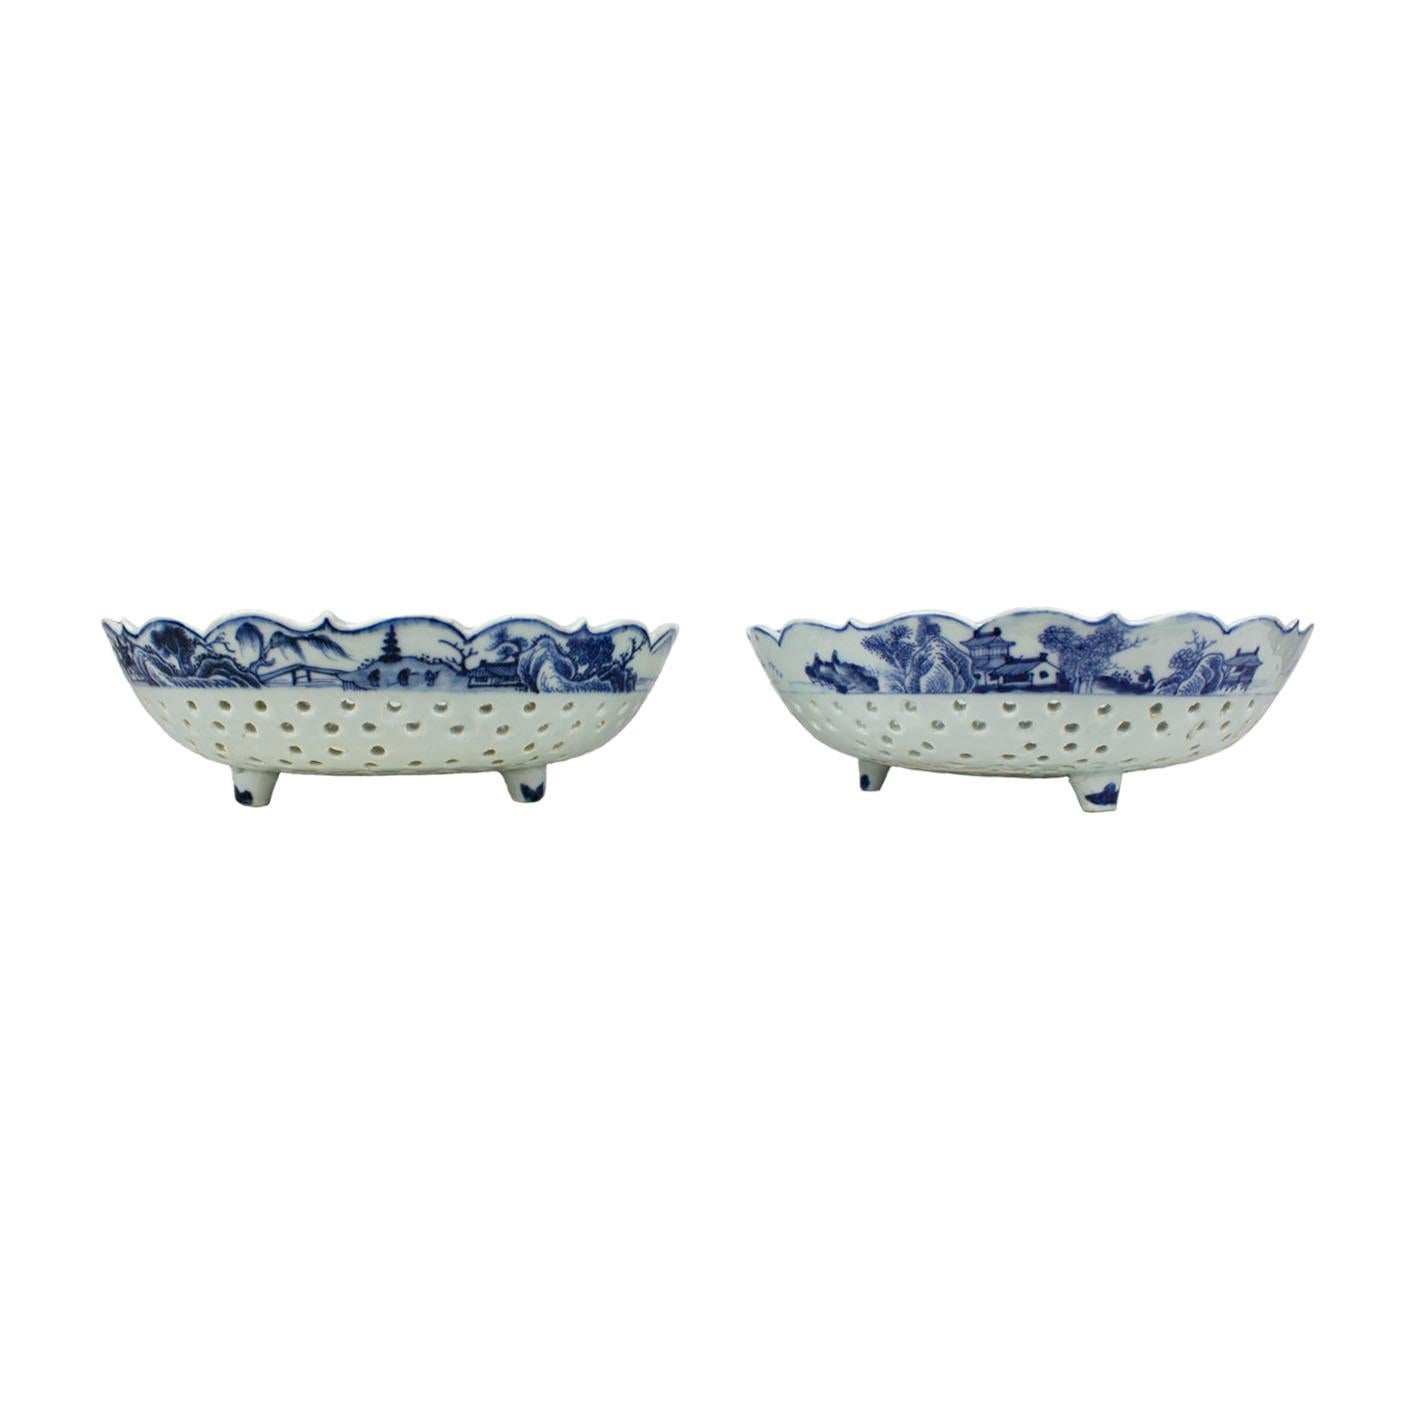 A pair of Chinese porcelain strawberry bowls, East India Company, Qianlong period (1736-1795). Underglaze blue decoration with vegetal motifs on the scalloped rim. These bowls were used to drain water from the strawberries after being washed.